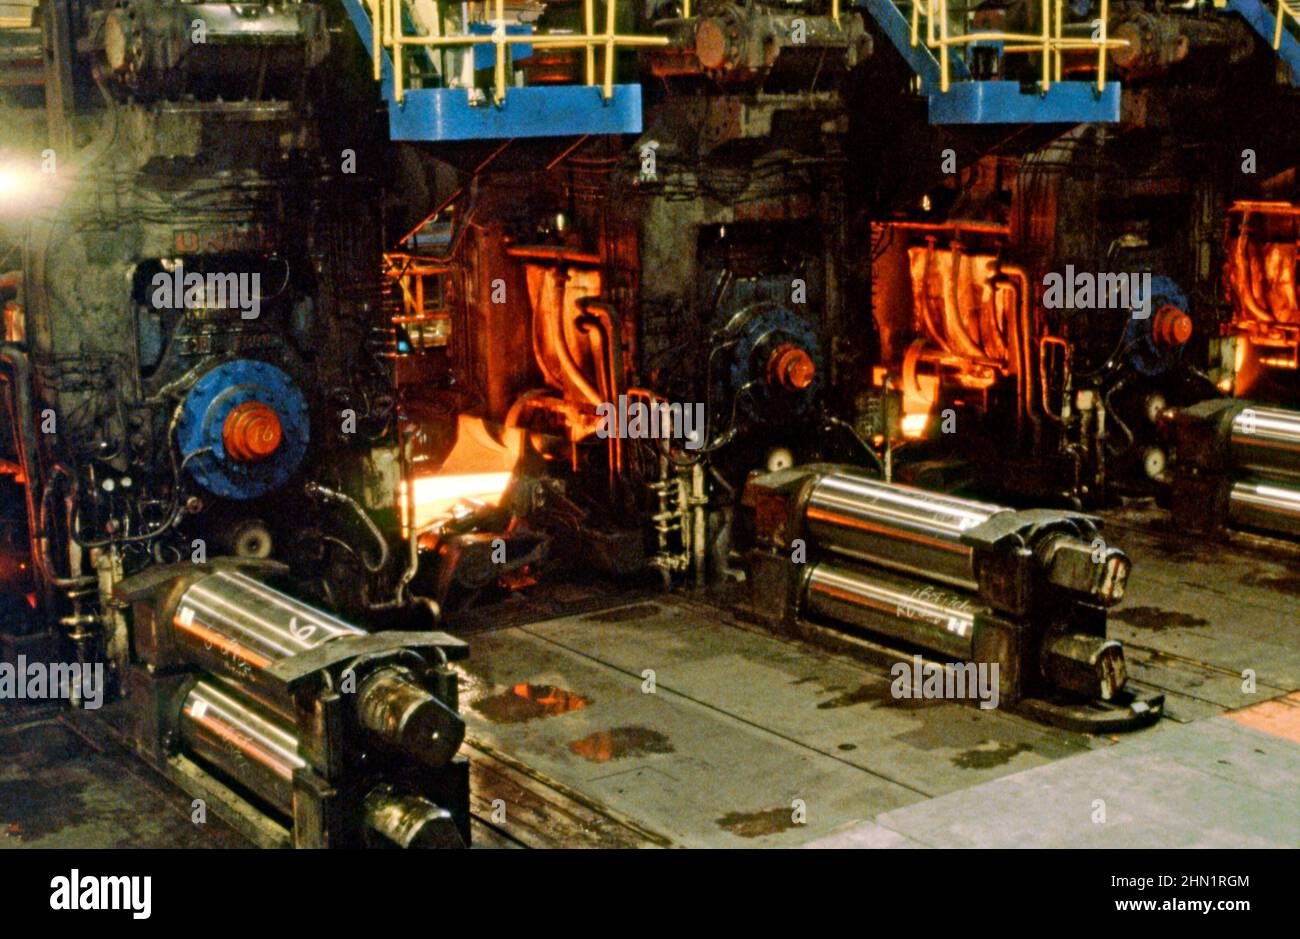 A mid-1980s view inside the Port Talbot Steelworks, an integrated steel production plant in Port Talbot, West Glamorgan, Wales, UK. Inside the mill hot sheet-steel is being rolled out on the production line. This image is from a vintage colour transparency – a vintage 1980s photograph. Stock Photo